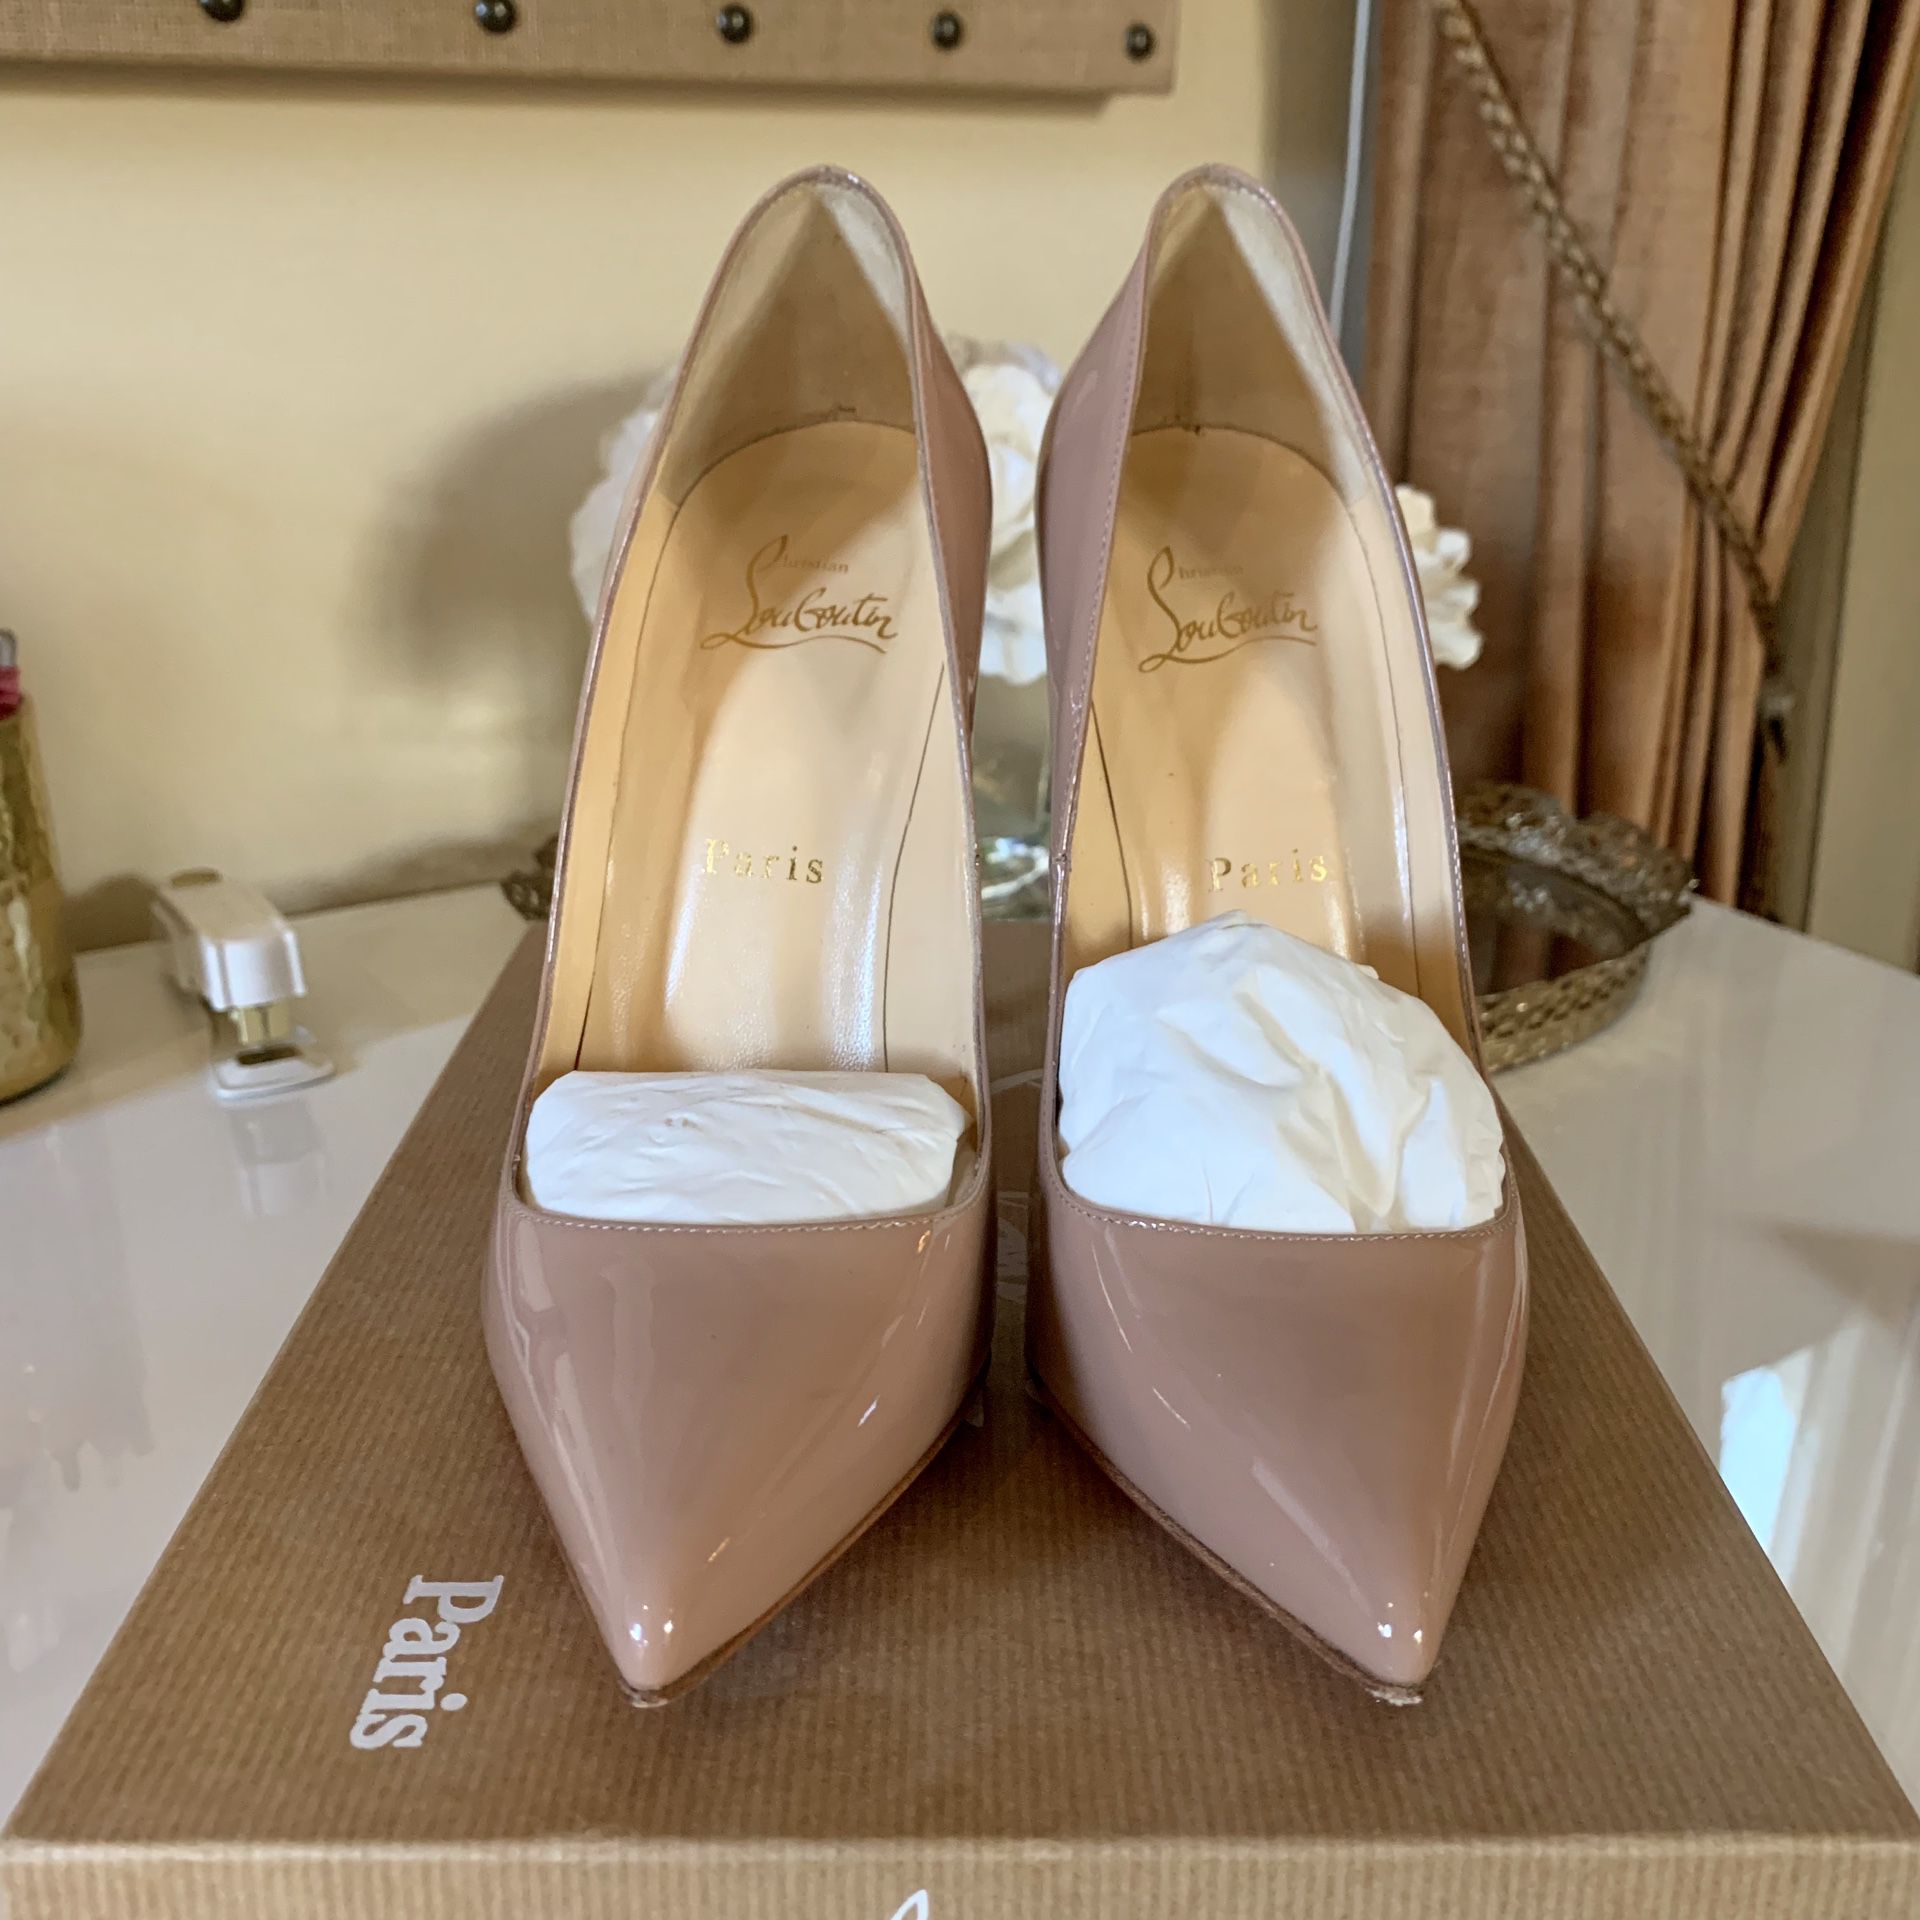 Christian Louboutin Pigalle 120” Size 37.5